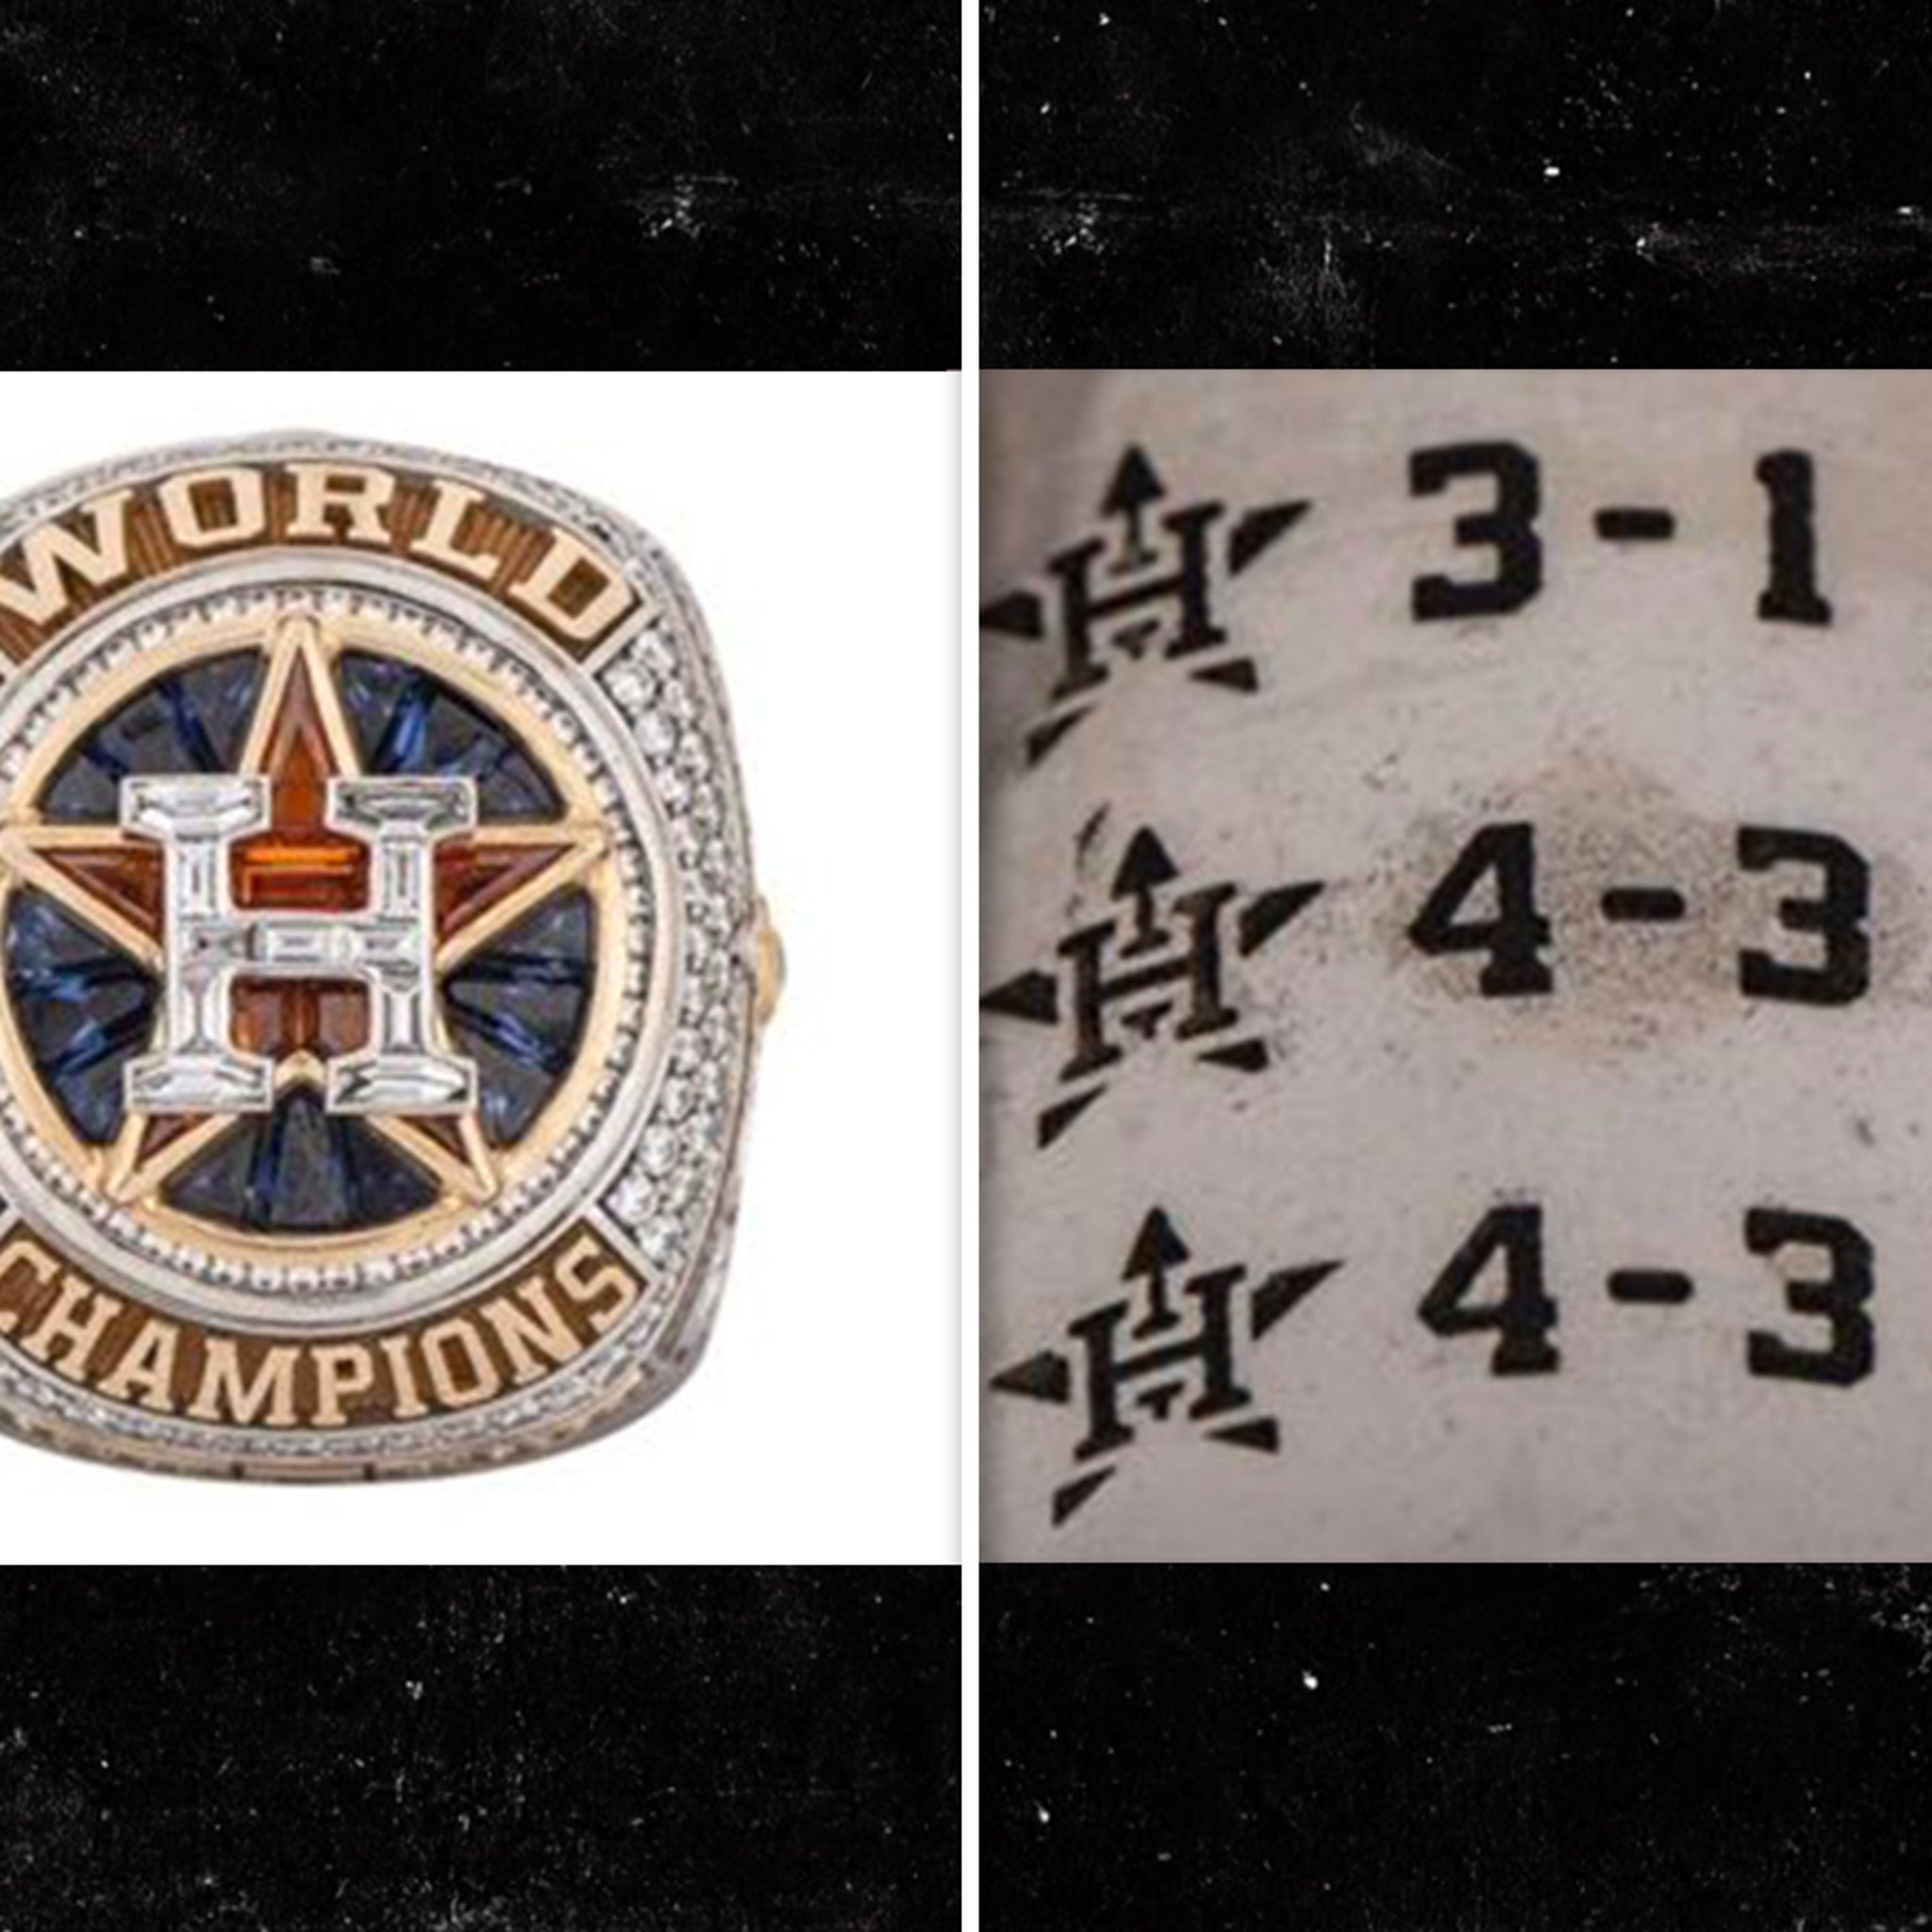 Houston jeweler shows off his Astros World Series ring designs